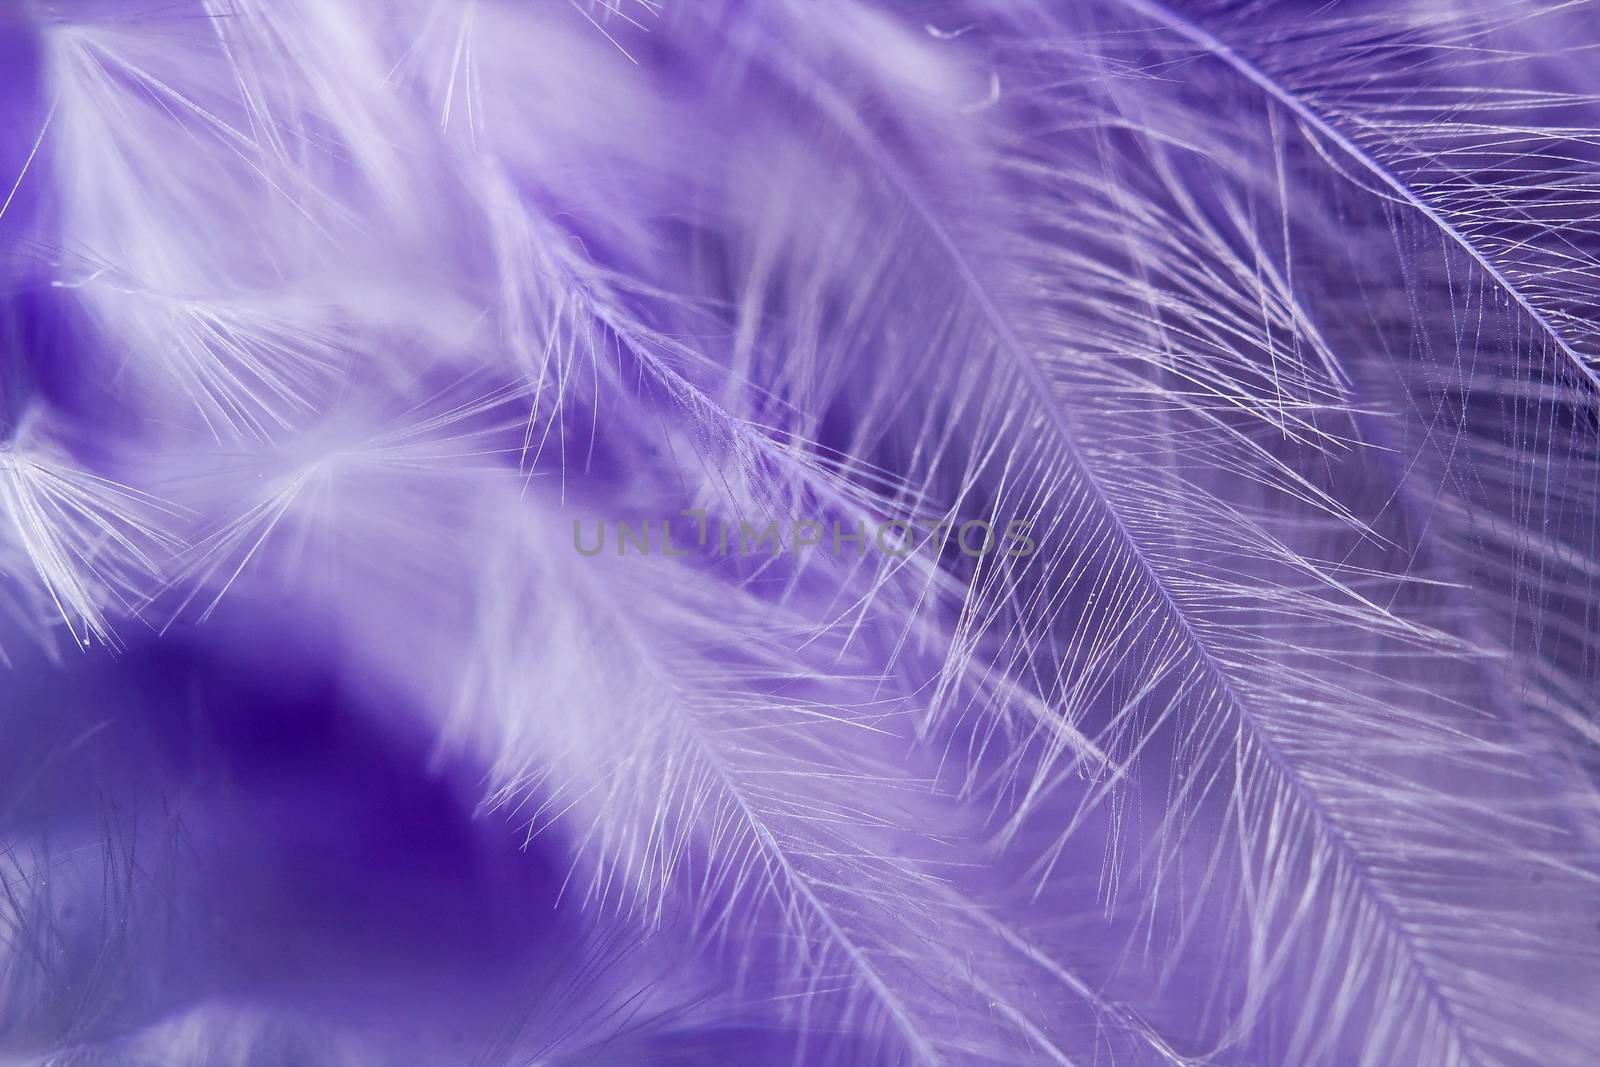 Feather abstract by dynamicfoto